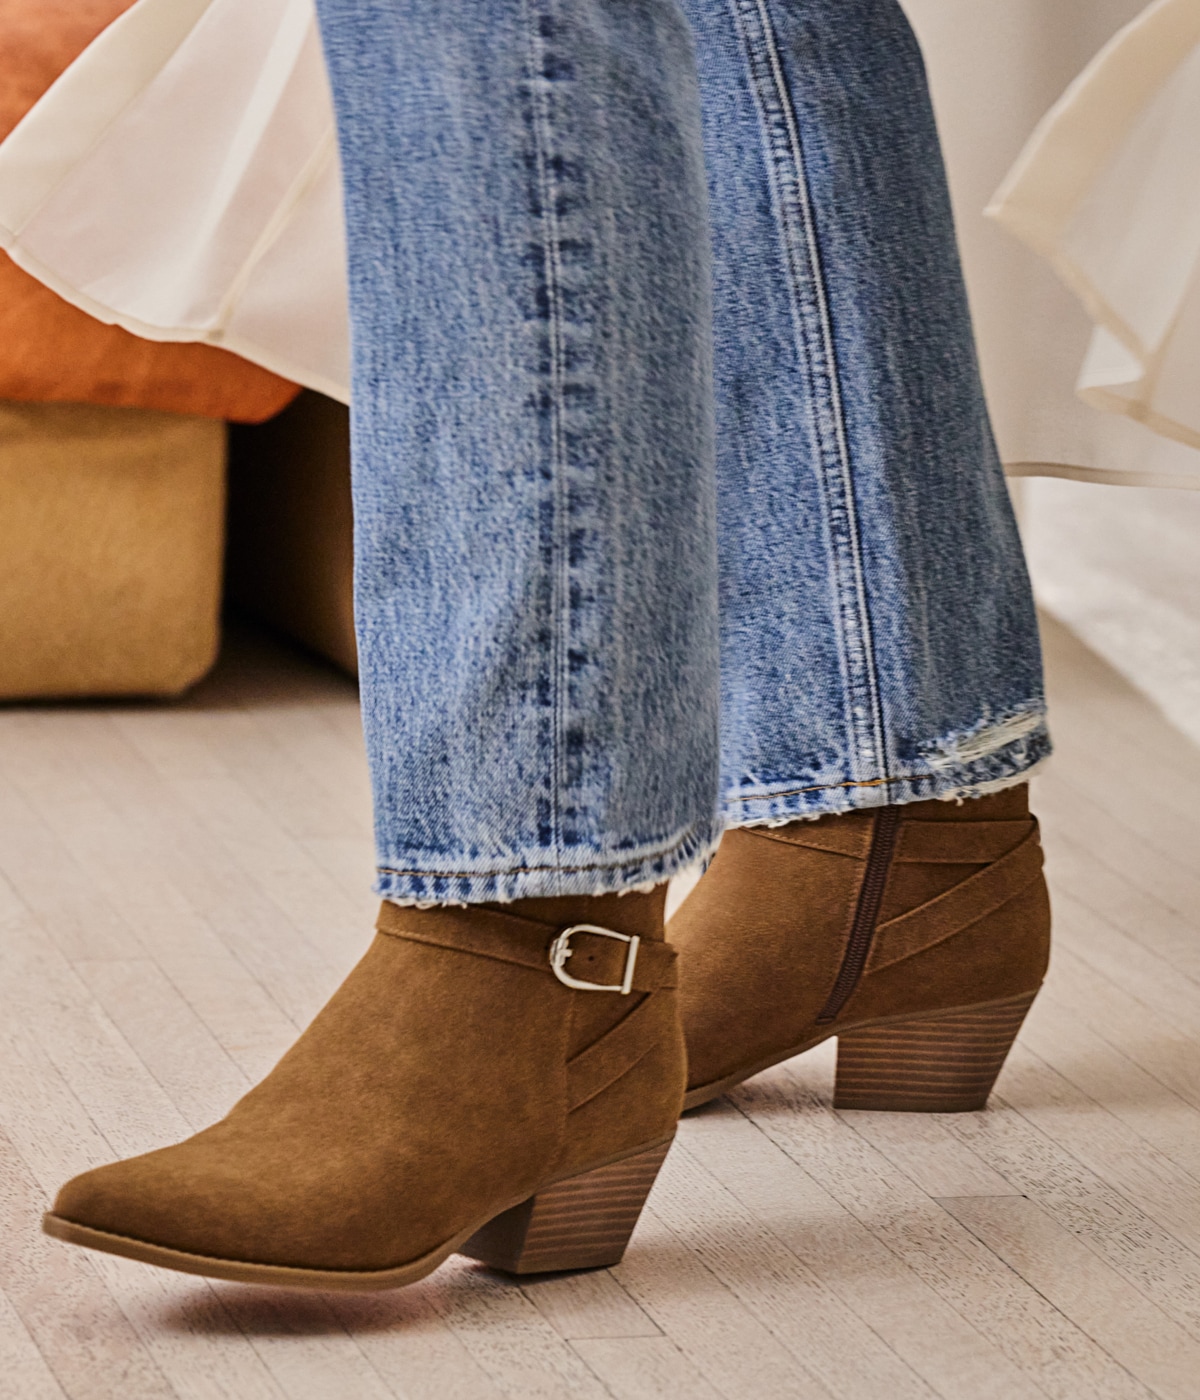 Western Trend Shoes and Booties